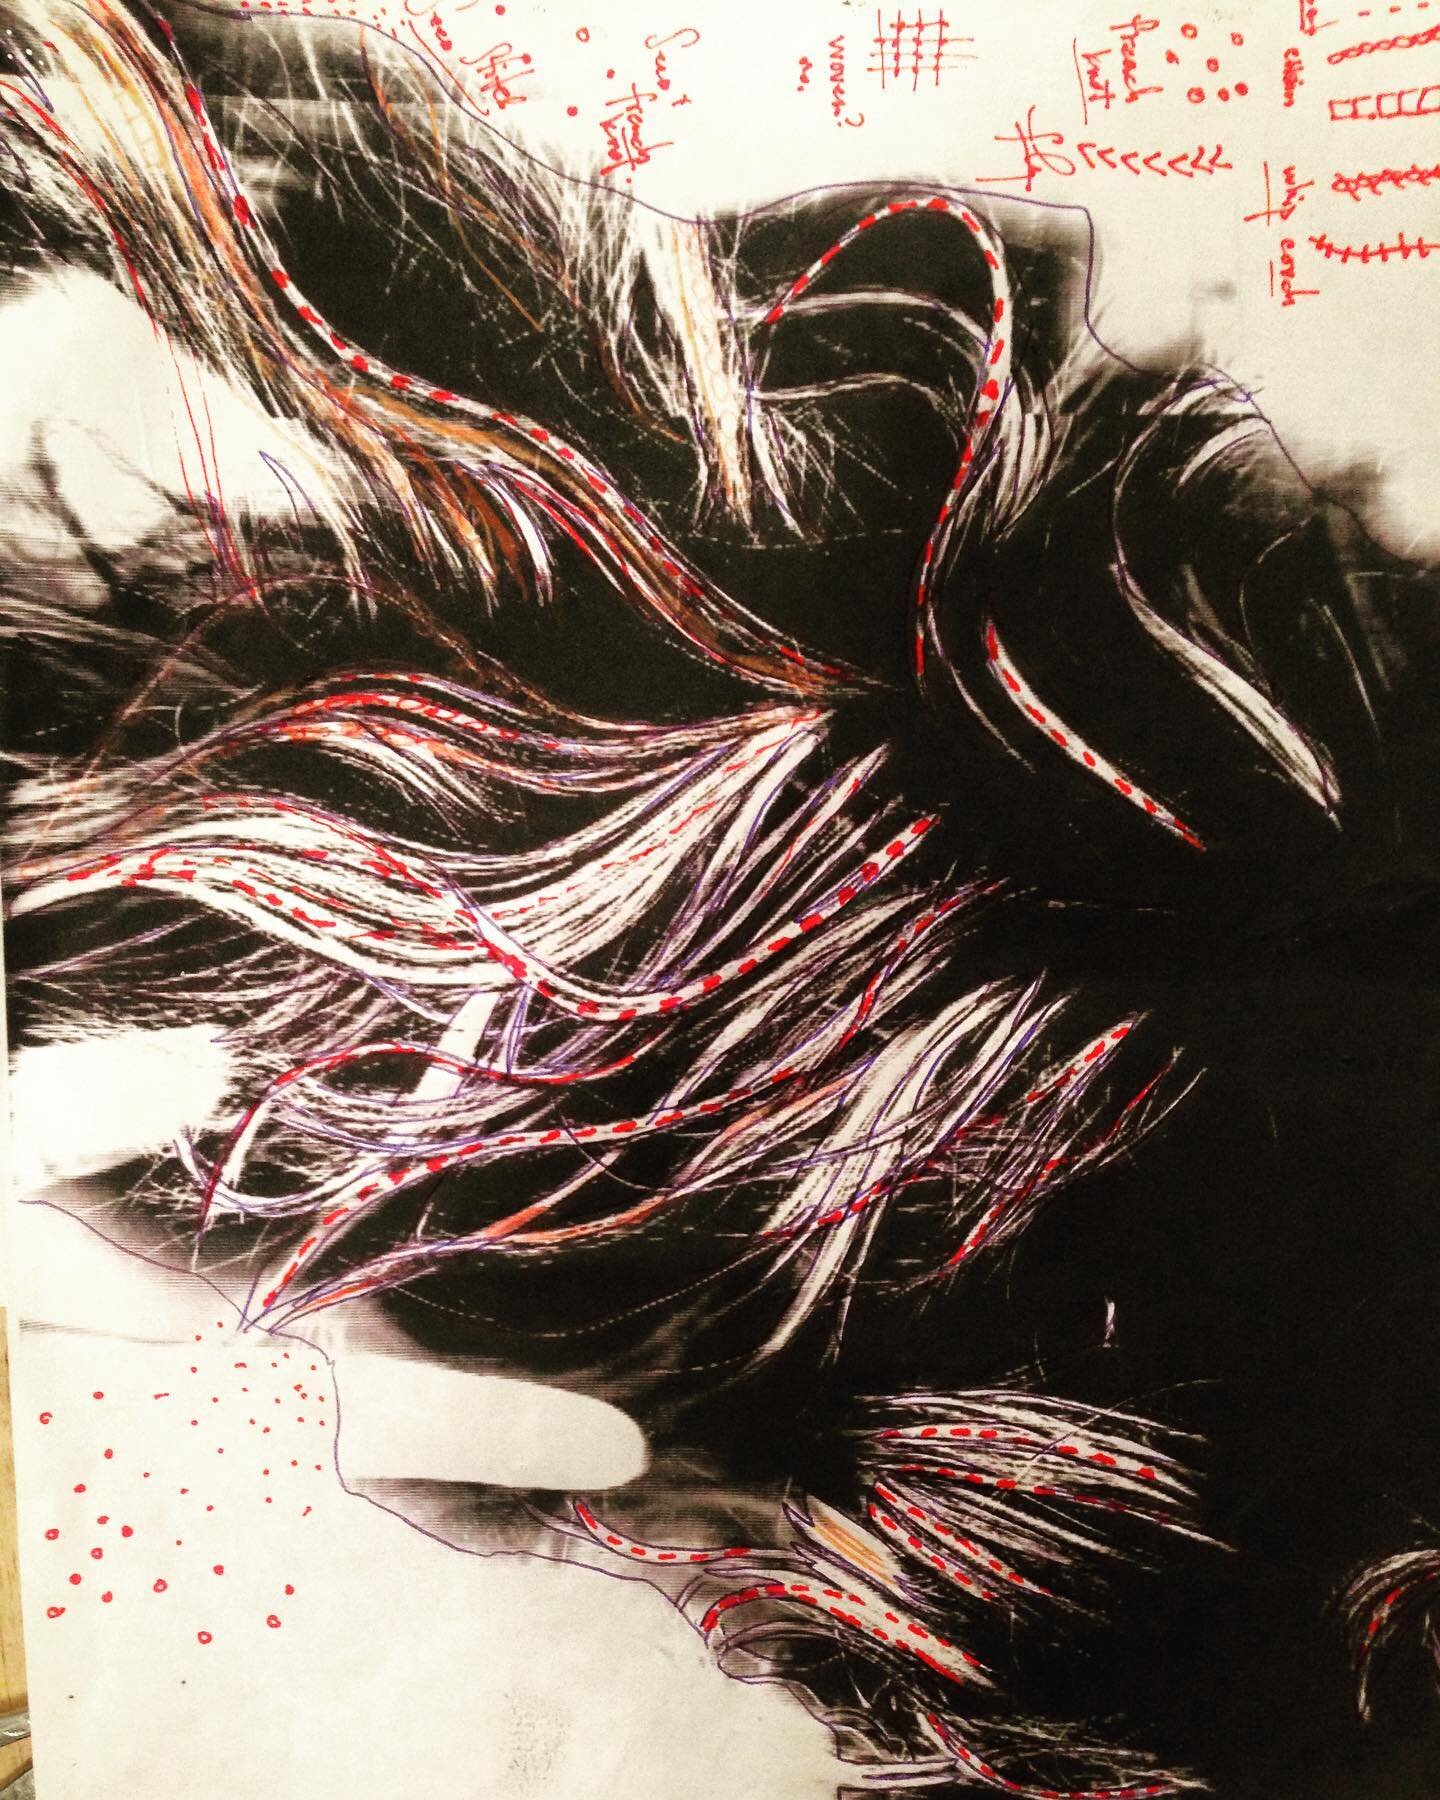 From the archives: plan for an embroidery inspired by my hair. #archive #creativemess #sketchbook #textileartist